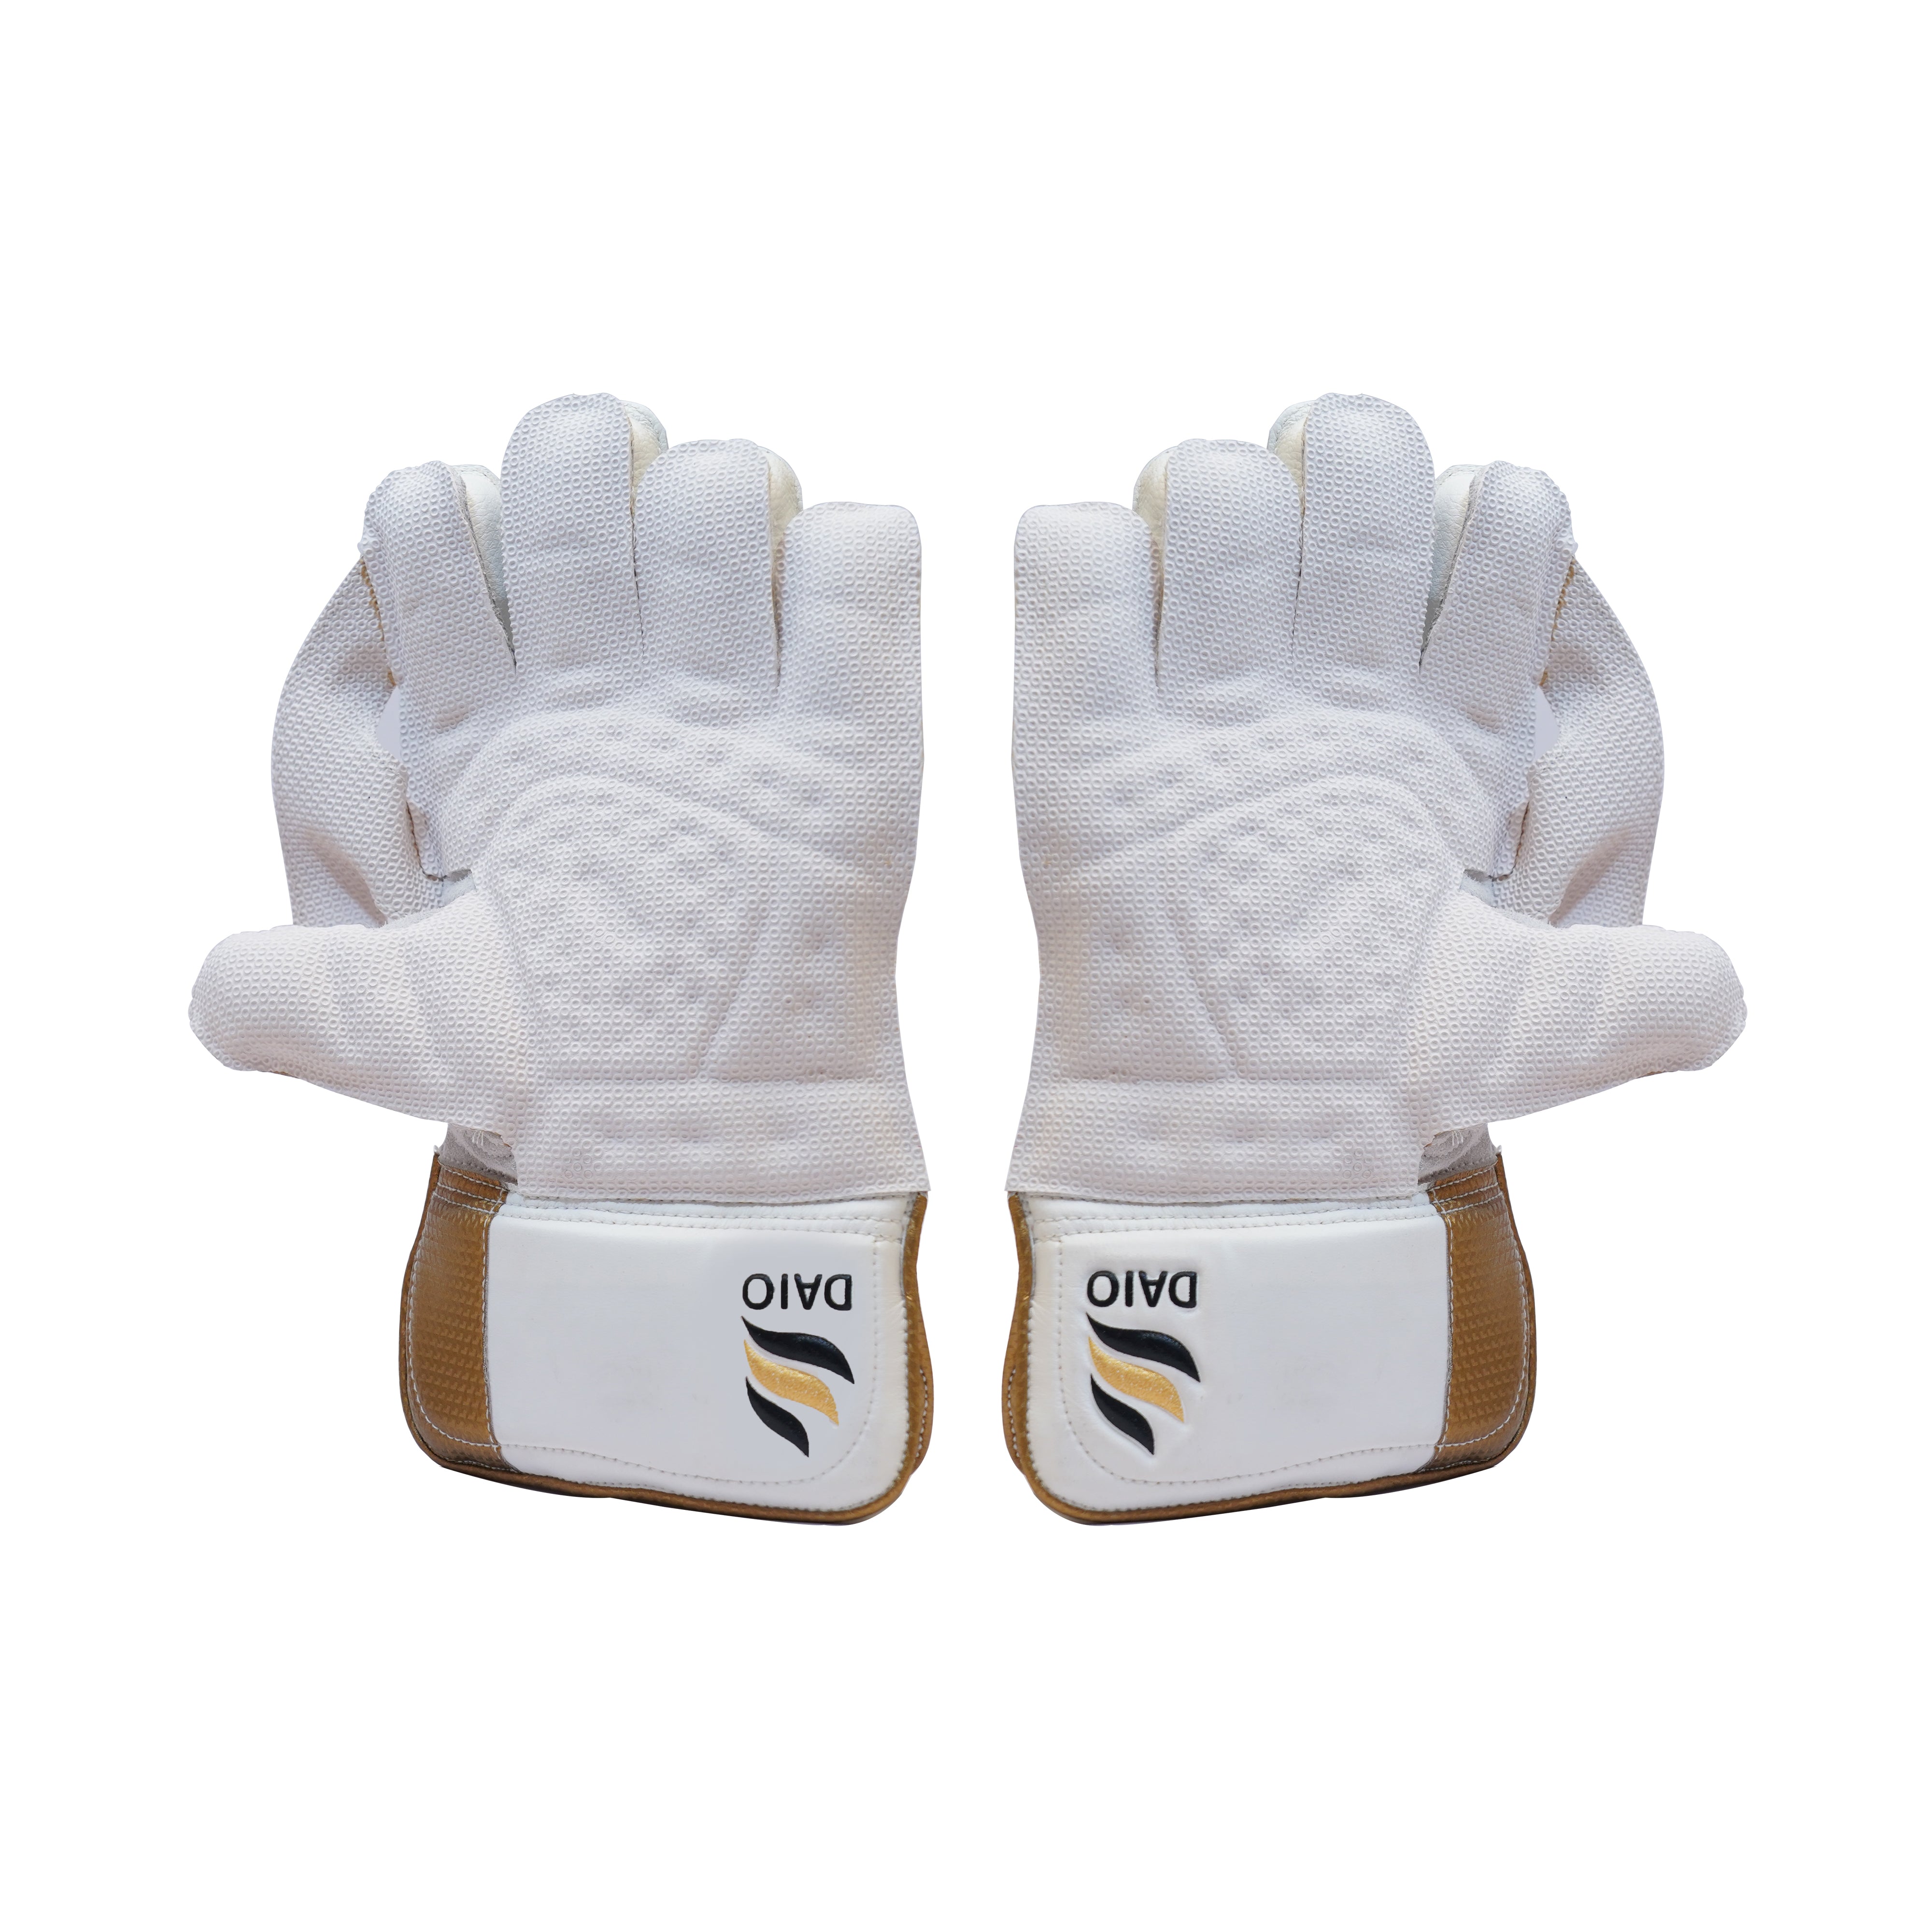 Daio limited edition wicket keeping gloves